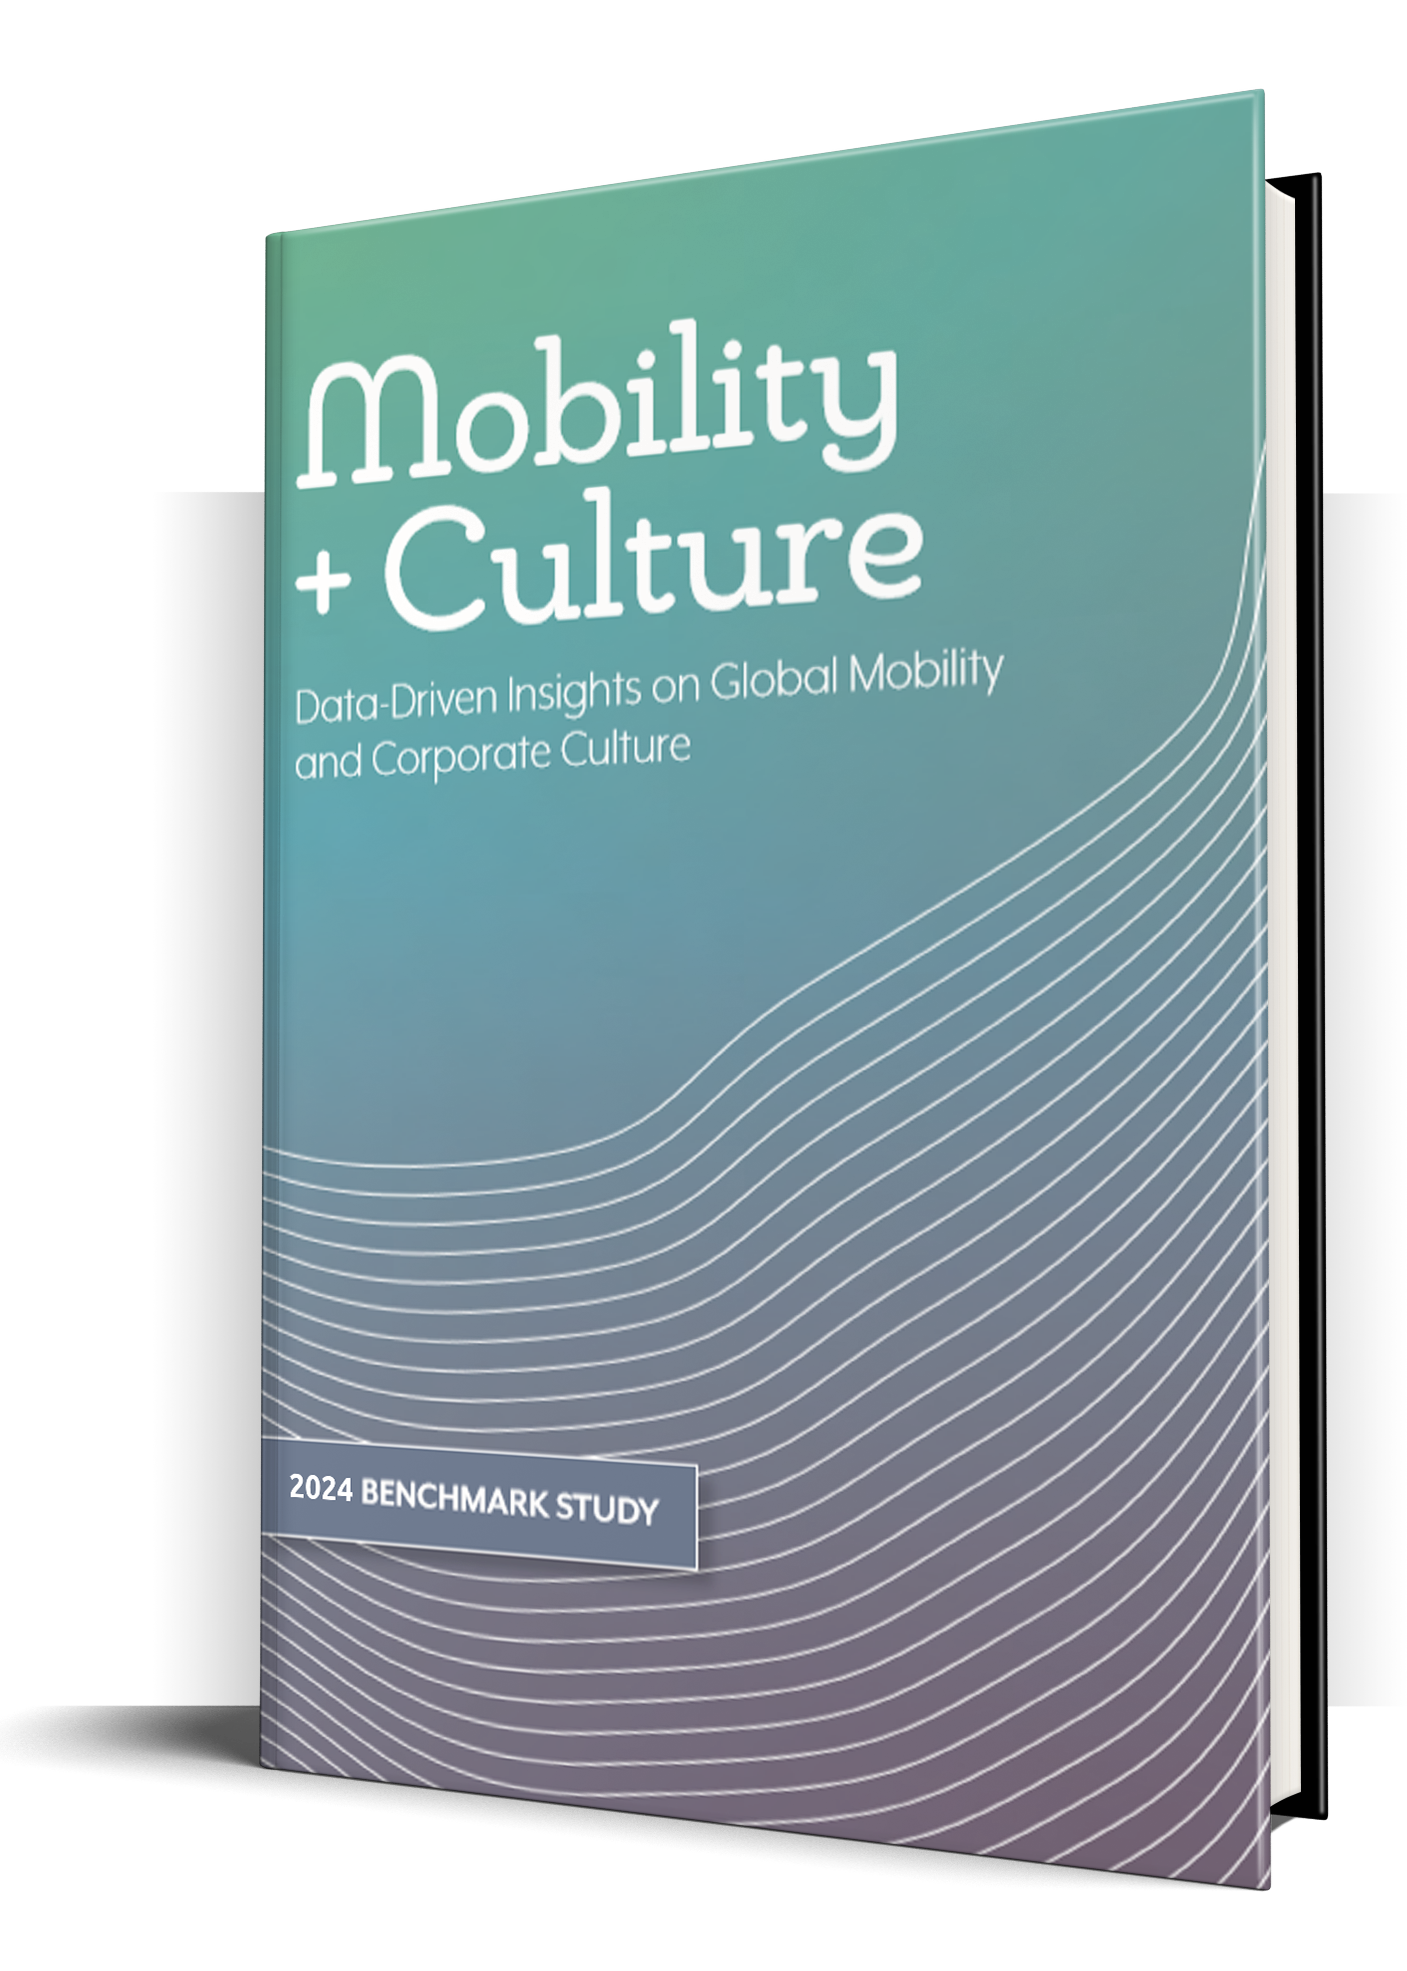 Global Mobility + Culture Benchmark Study